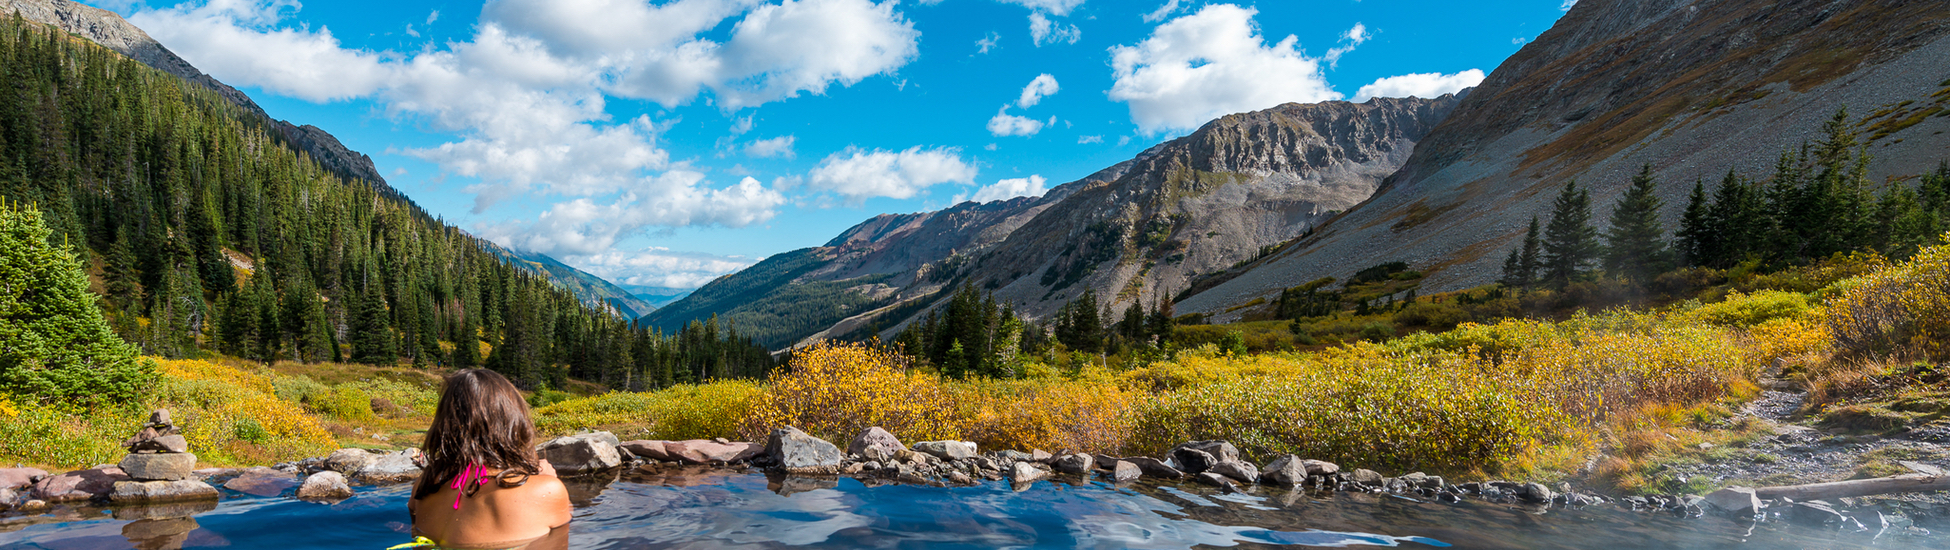 Image of a woman sitting in a natural hot spring in Colorado, soaking in the stunning mountain views from the pool